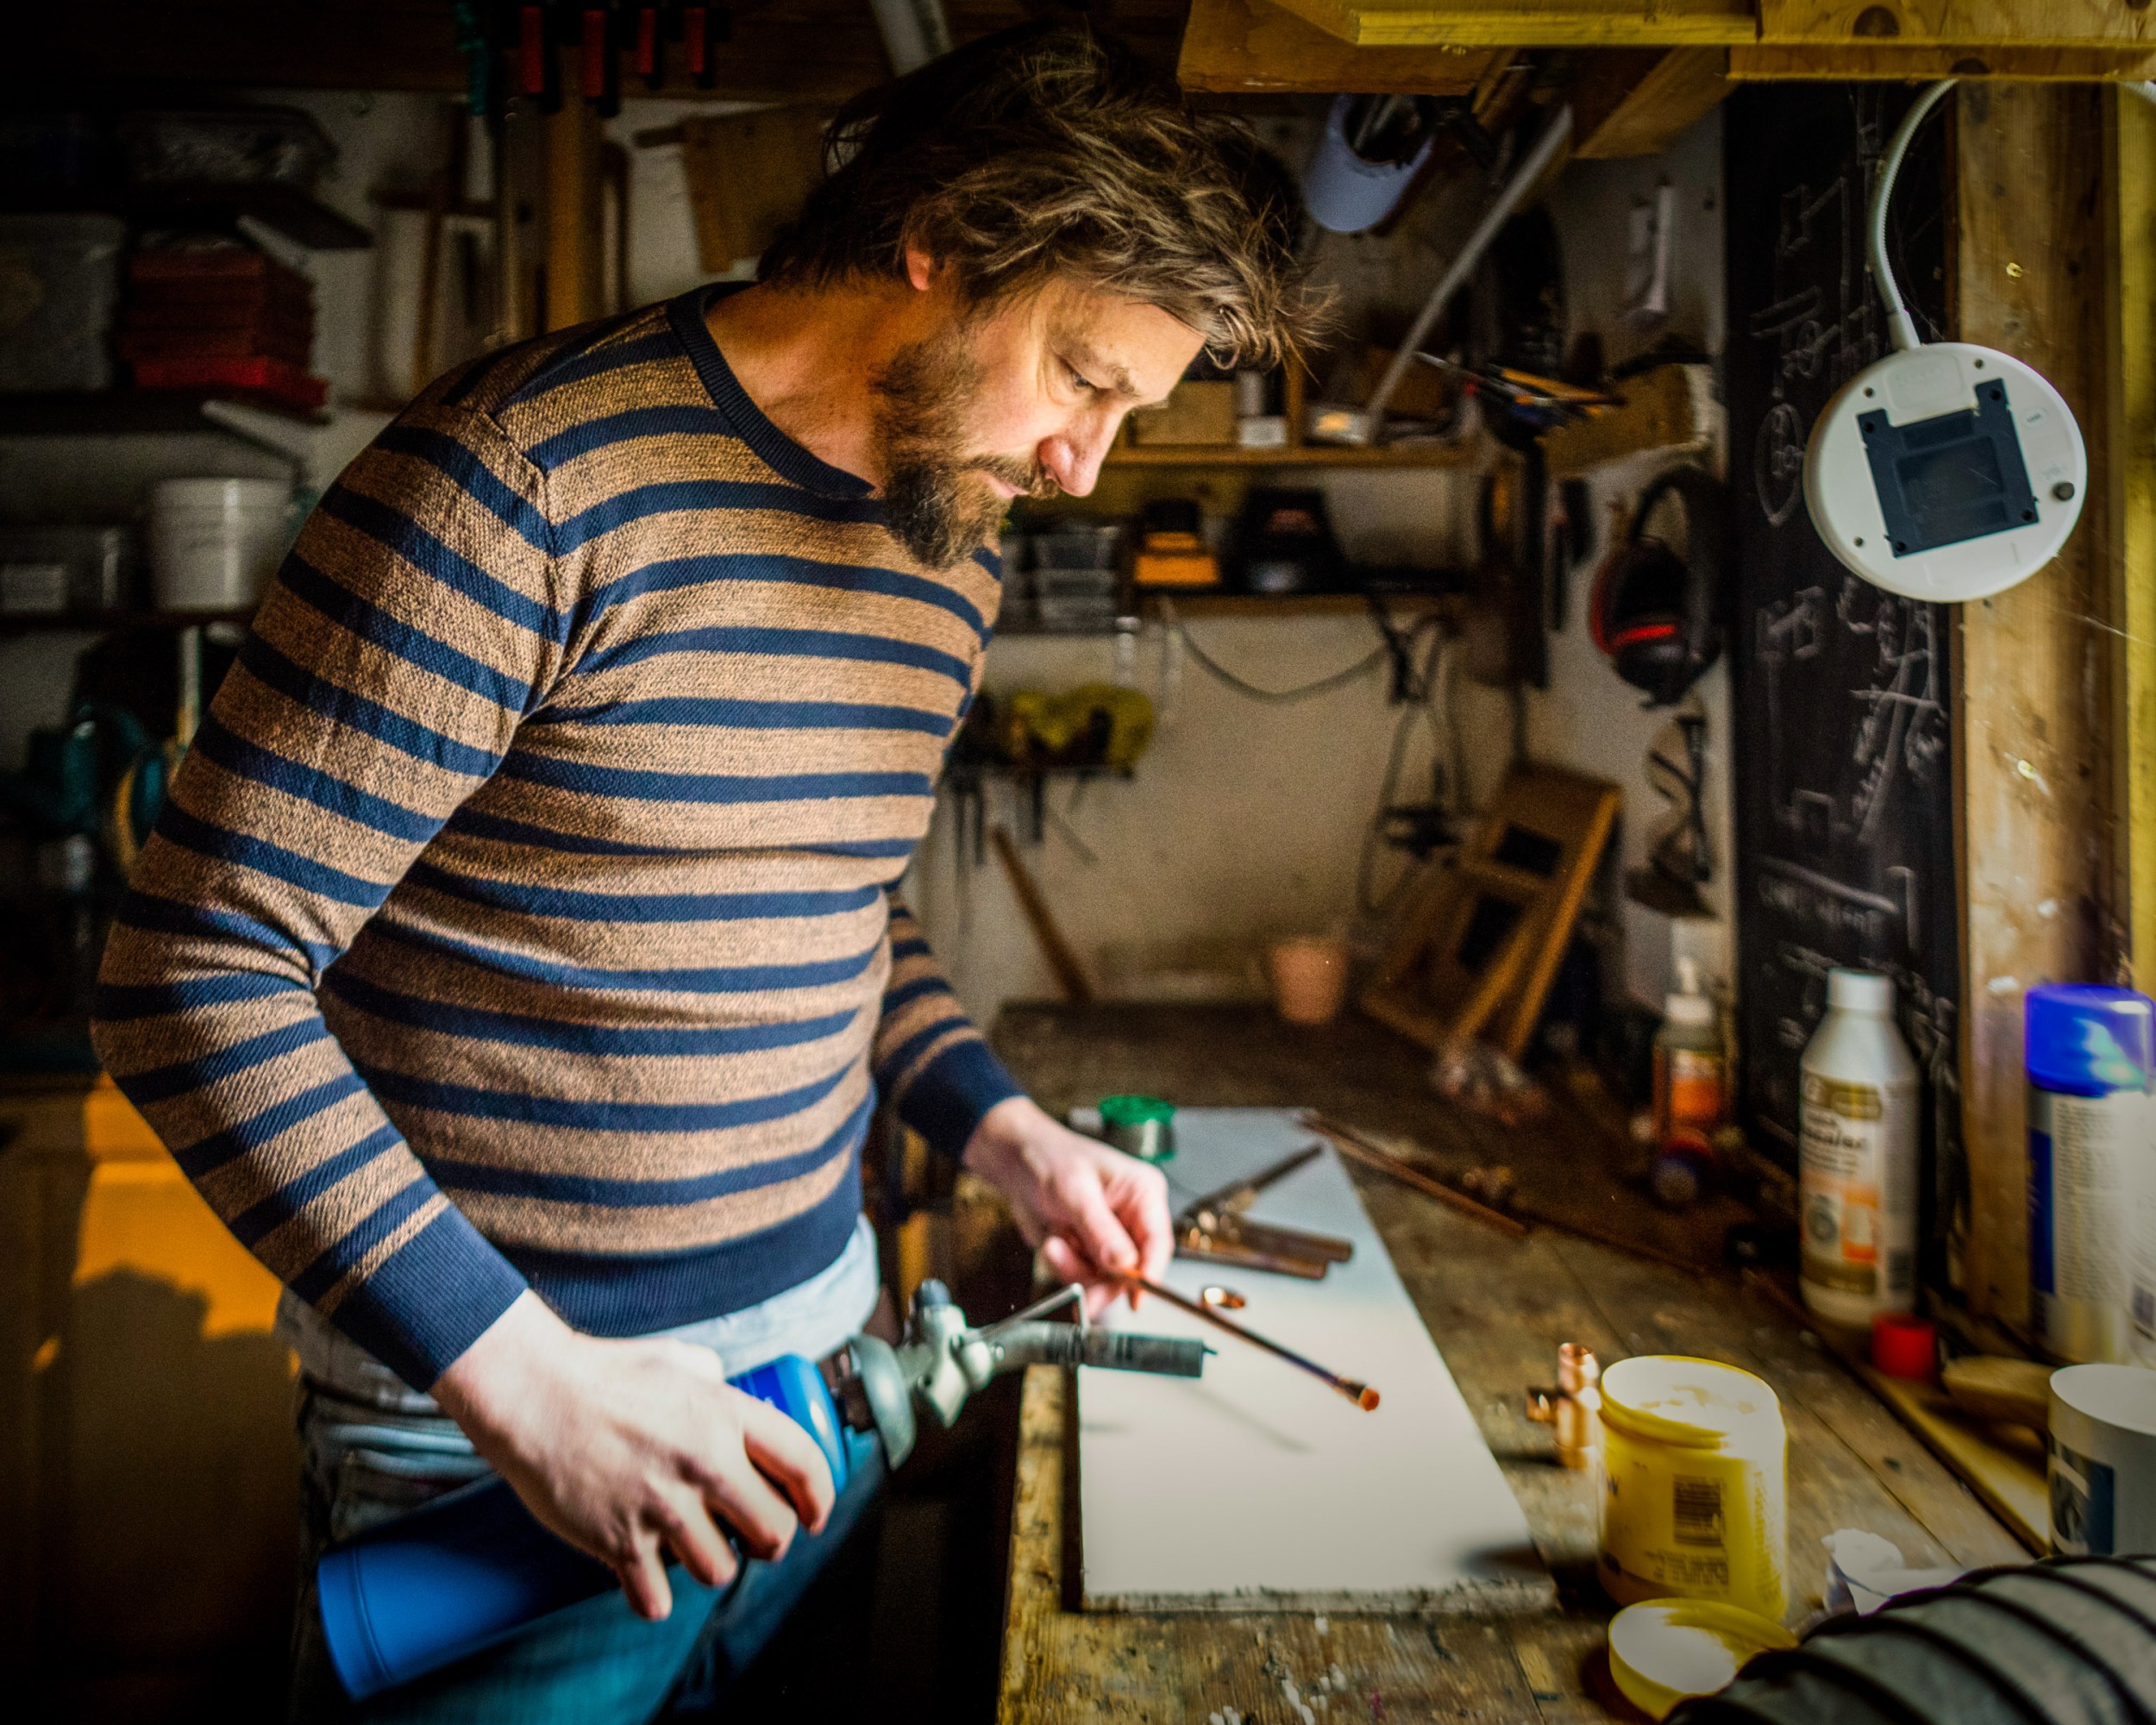 Chris holding a blowtorch at a workbench